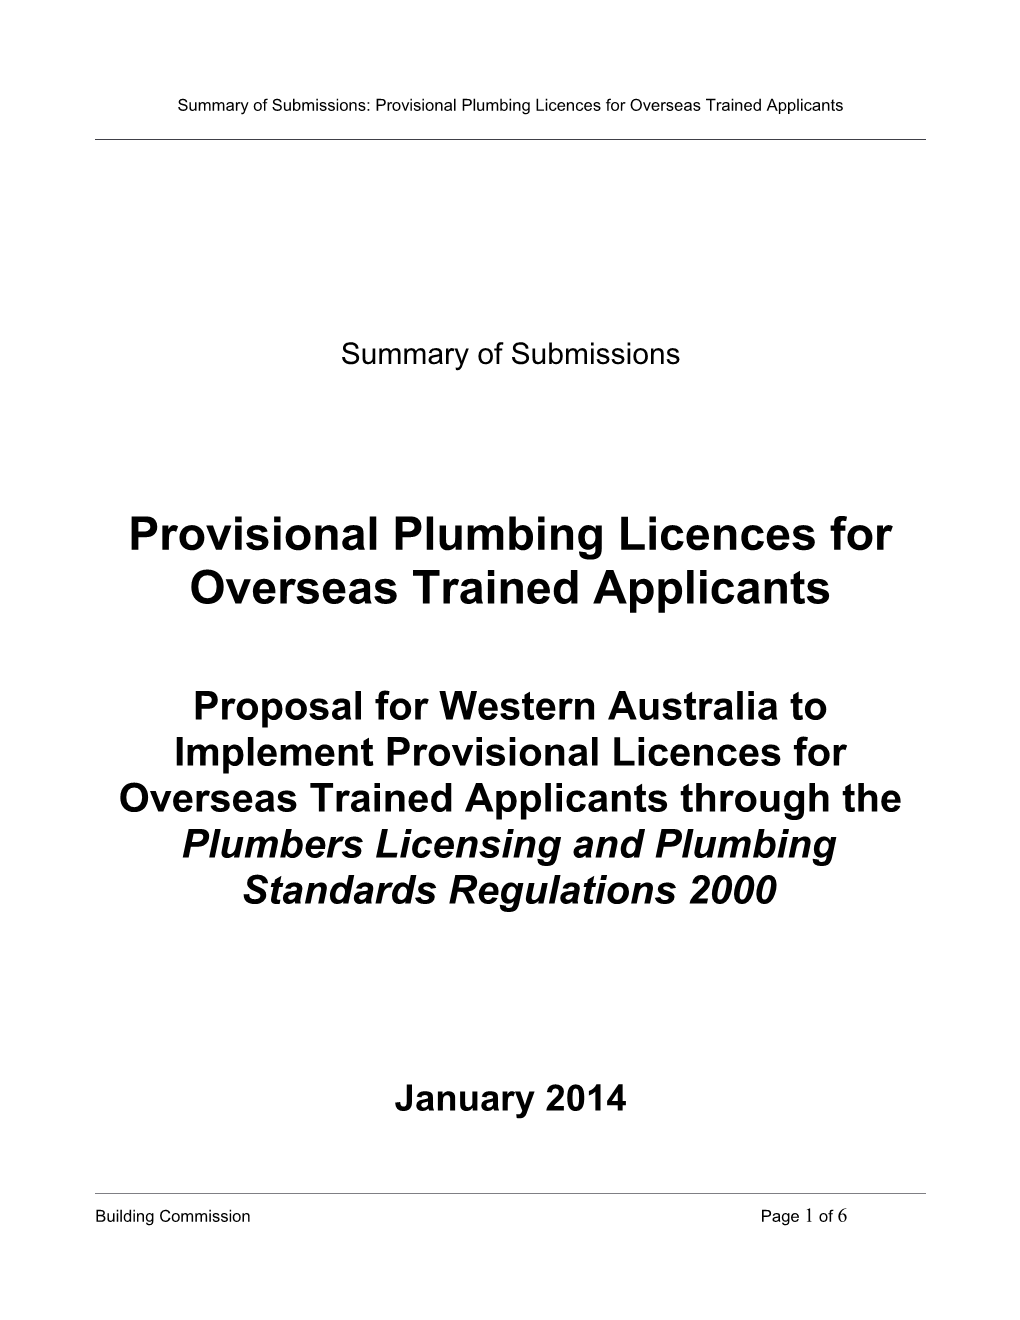 Summary of Submissions: Provisional Plumbing Licences for Overseas Trained Applicants